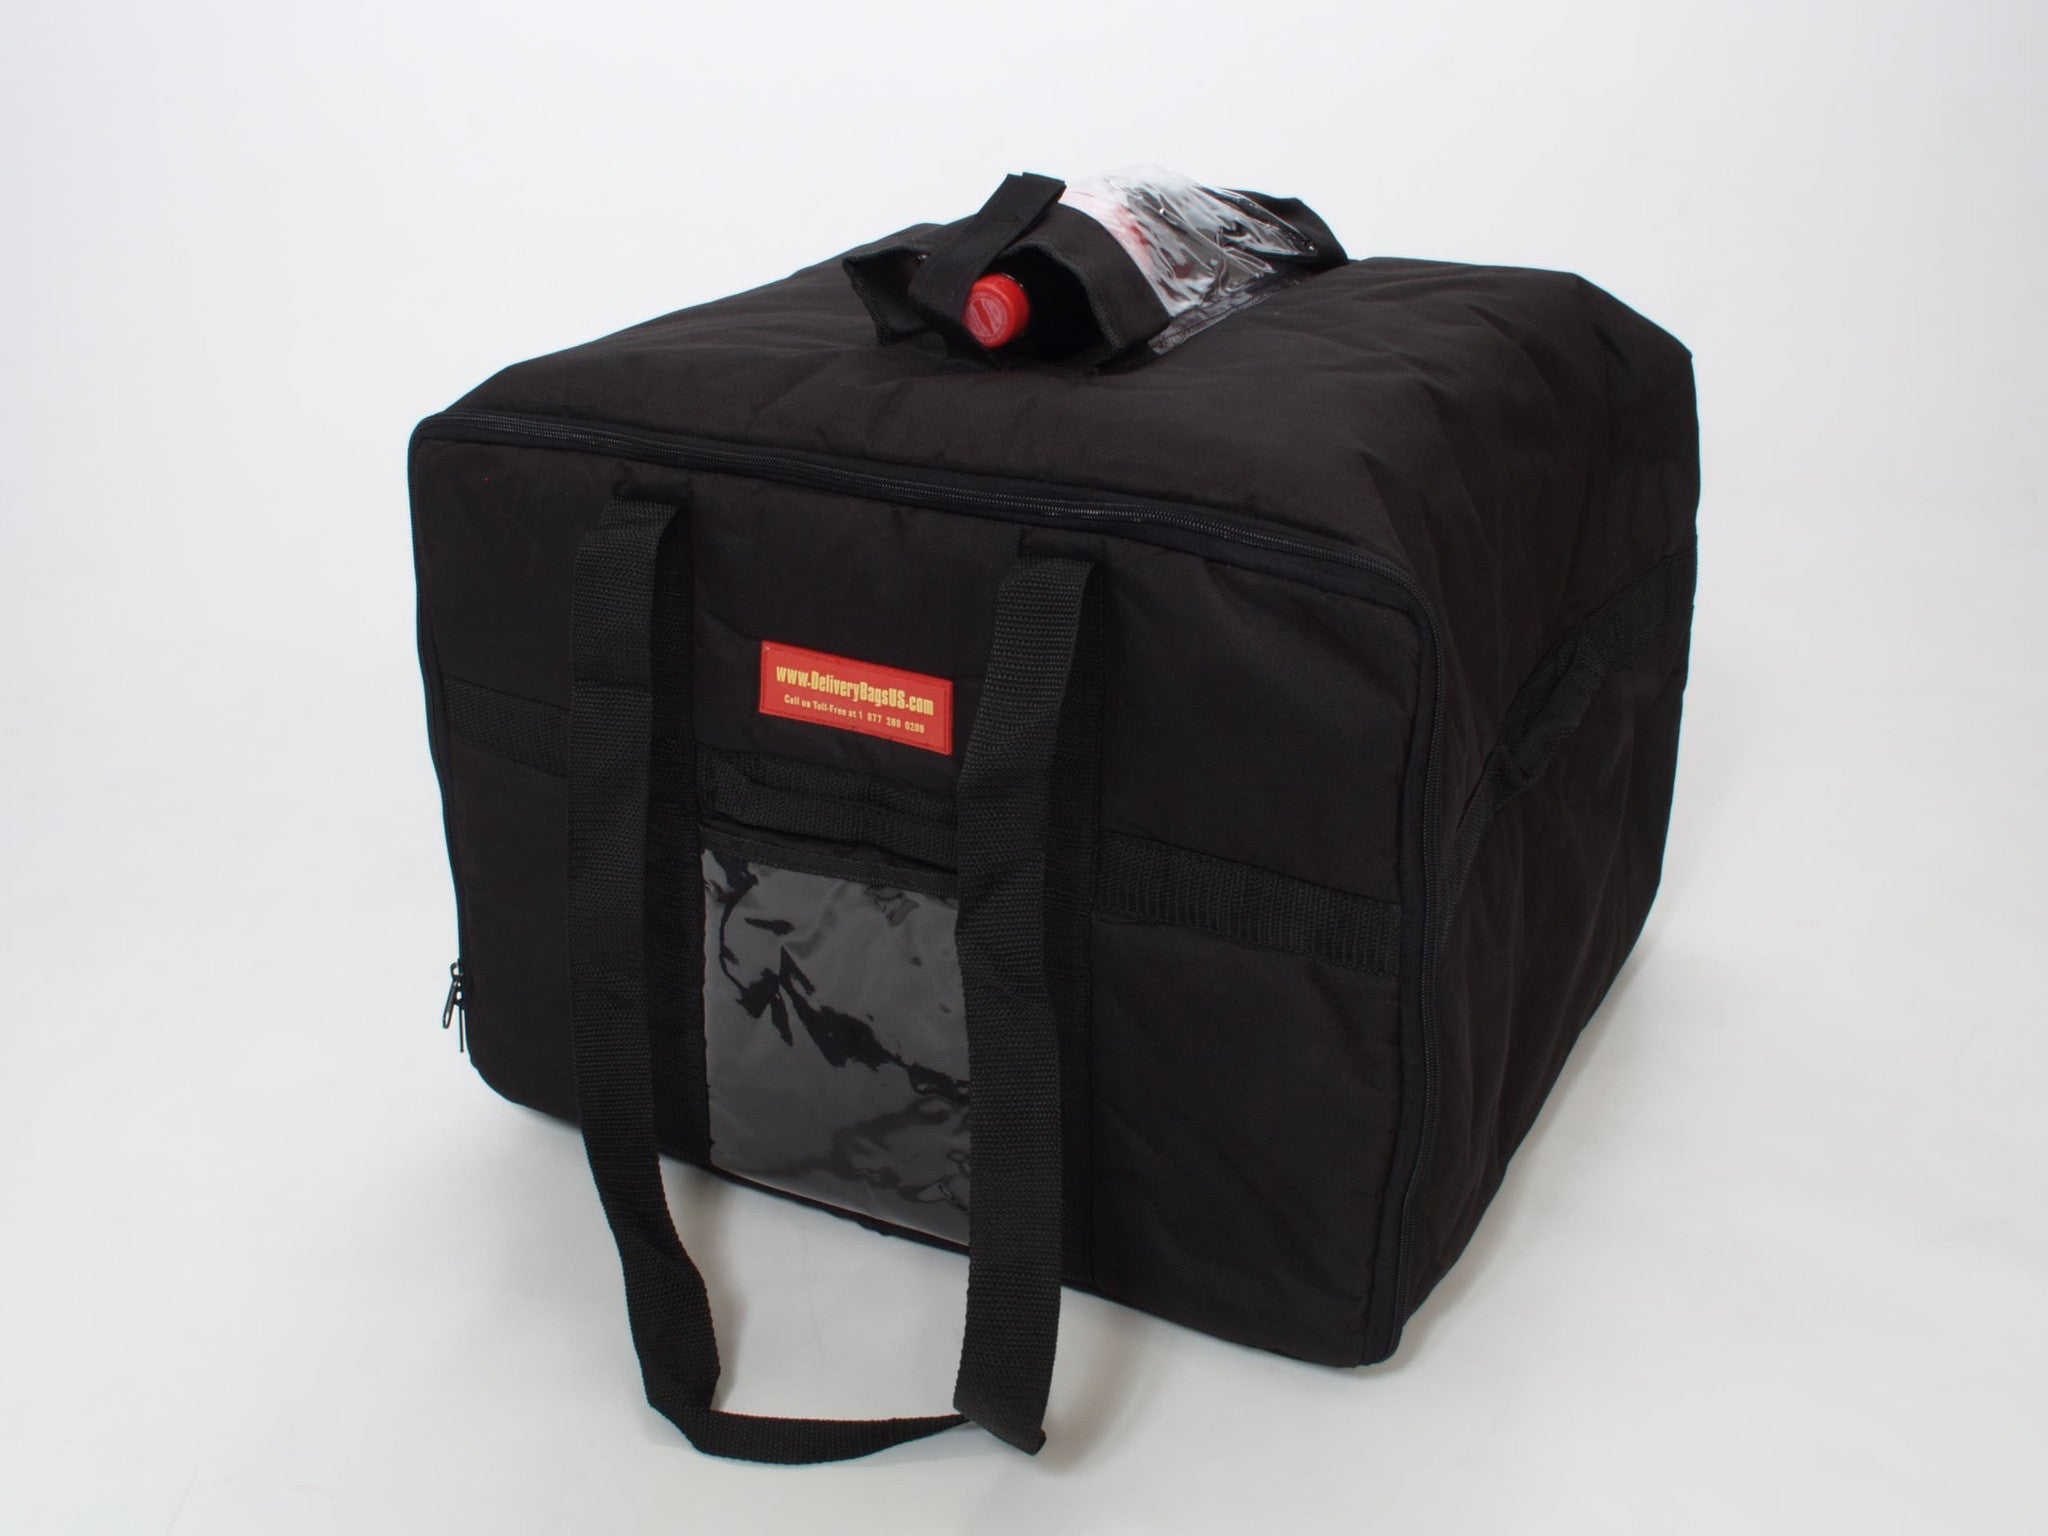 Catering Pizza DeliveryBag